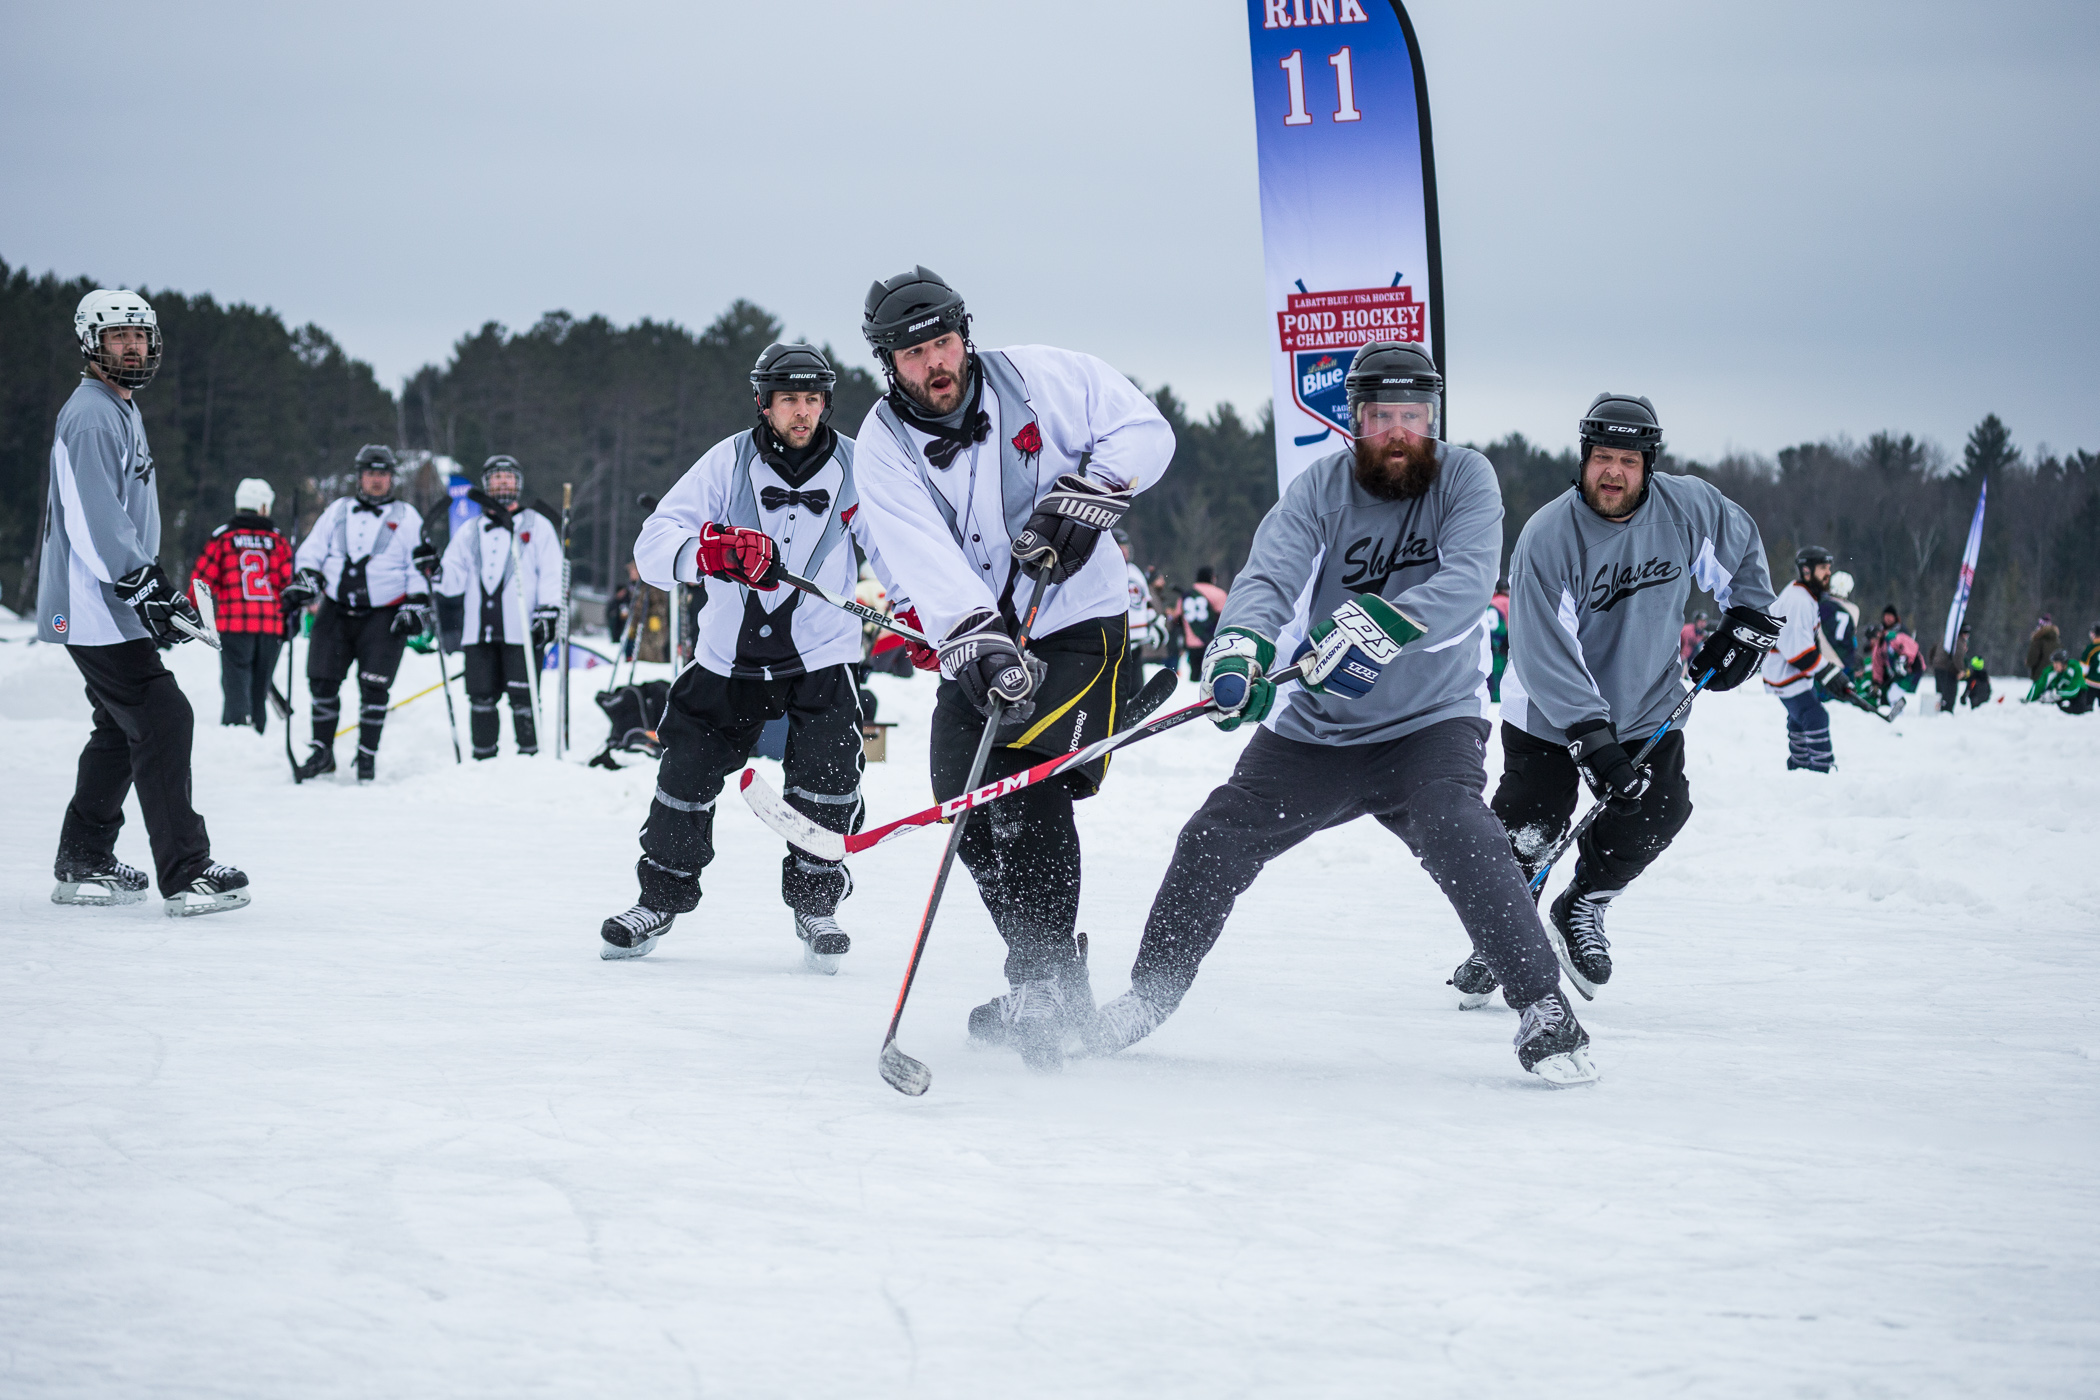 Eagle River's Dollar Lake is home to the Labatt Blue Pond Hockey Championships